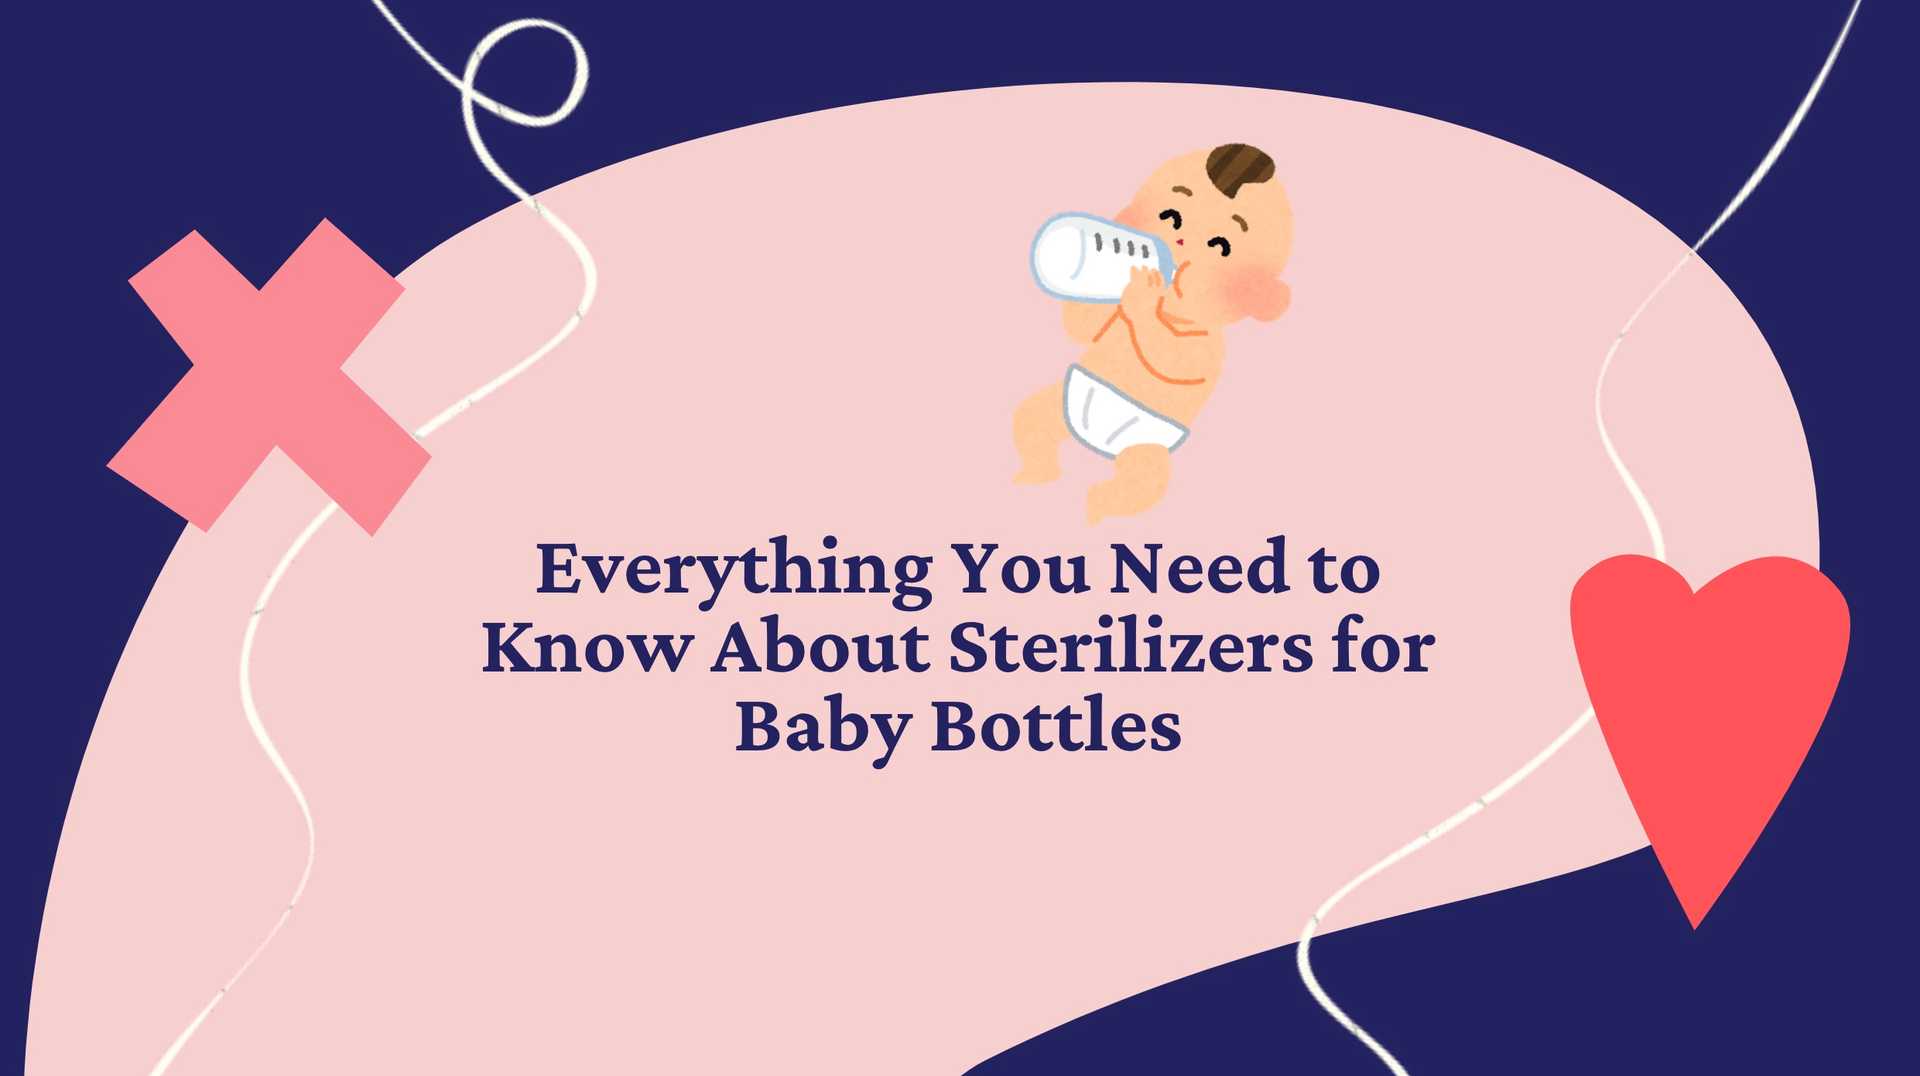 Everything You Need to Know About Sterilizers for Baby Bottles